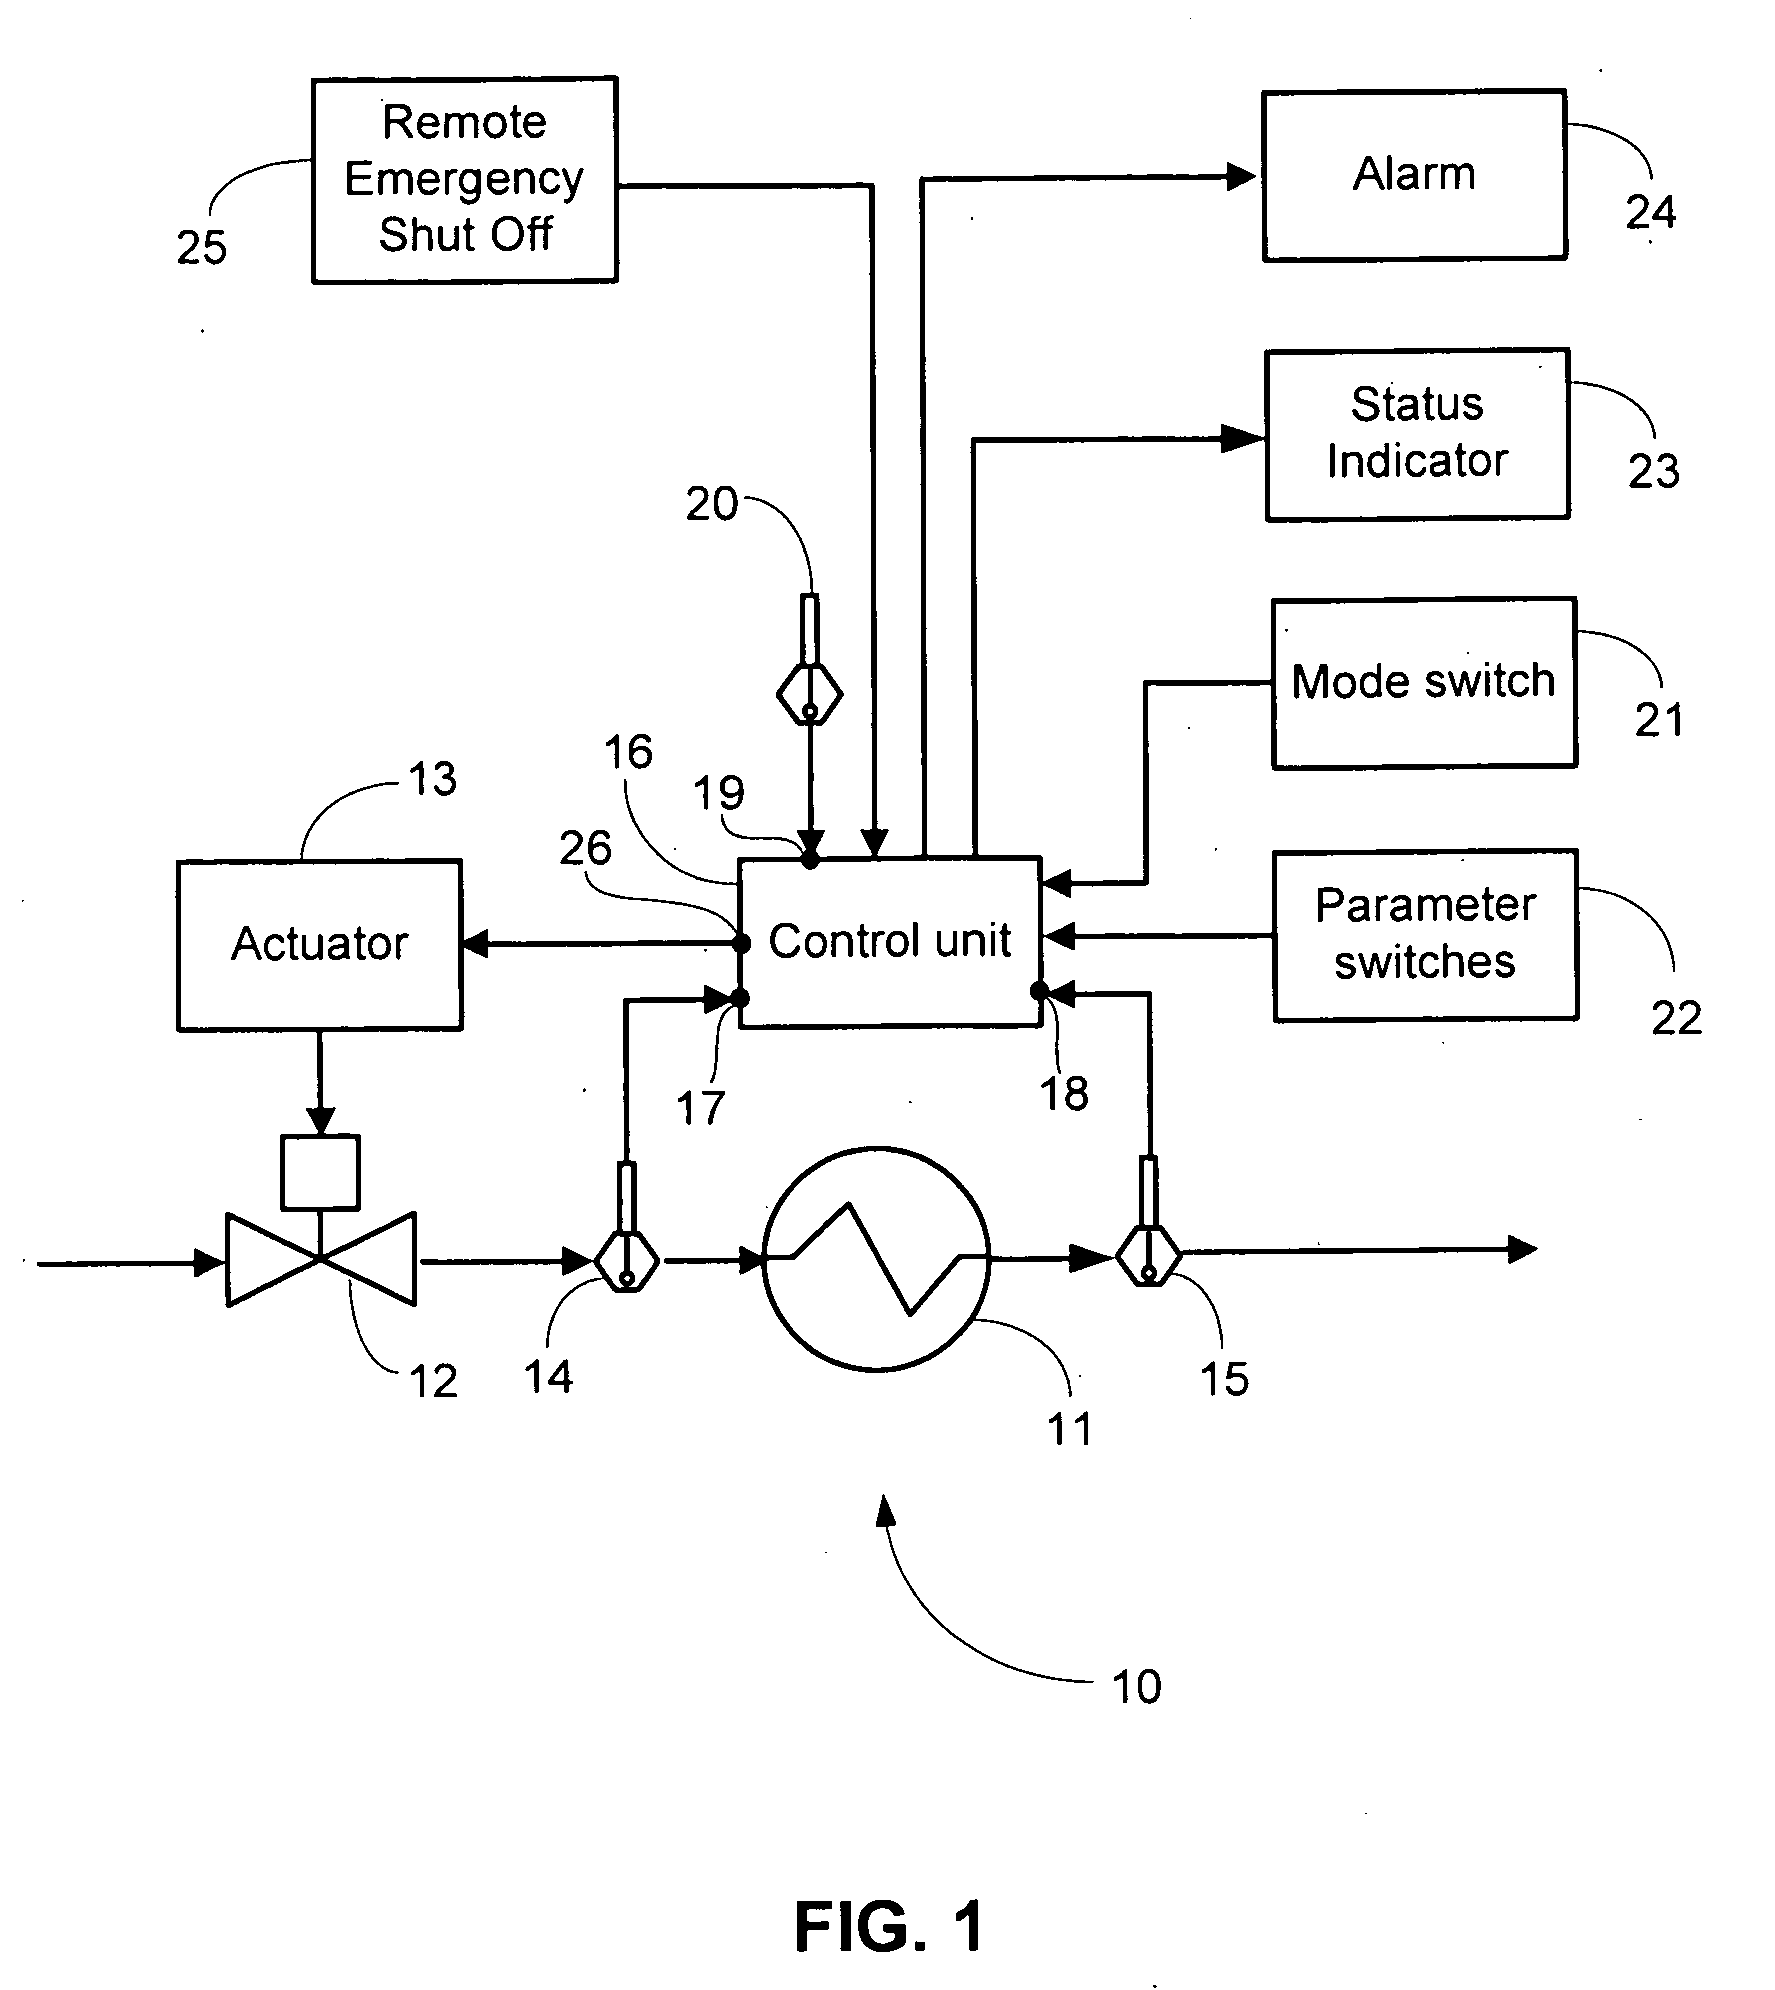 Standalone flow rate controller for controlling flow rate of cooling or heating fluid through a heat exchanger